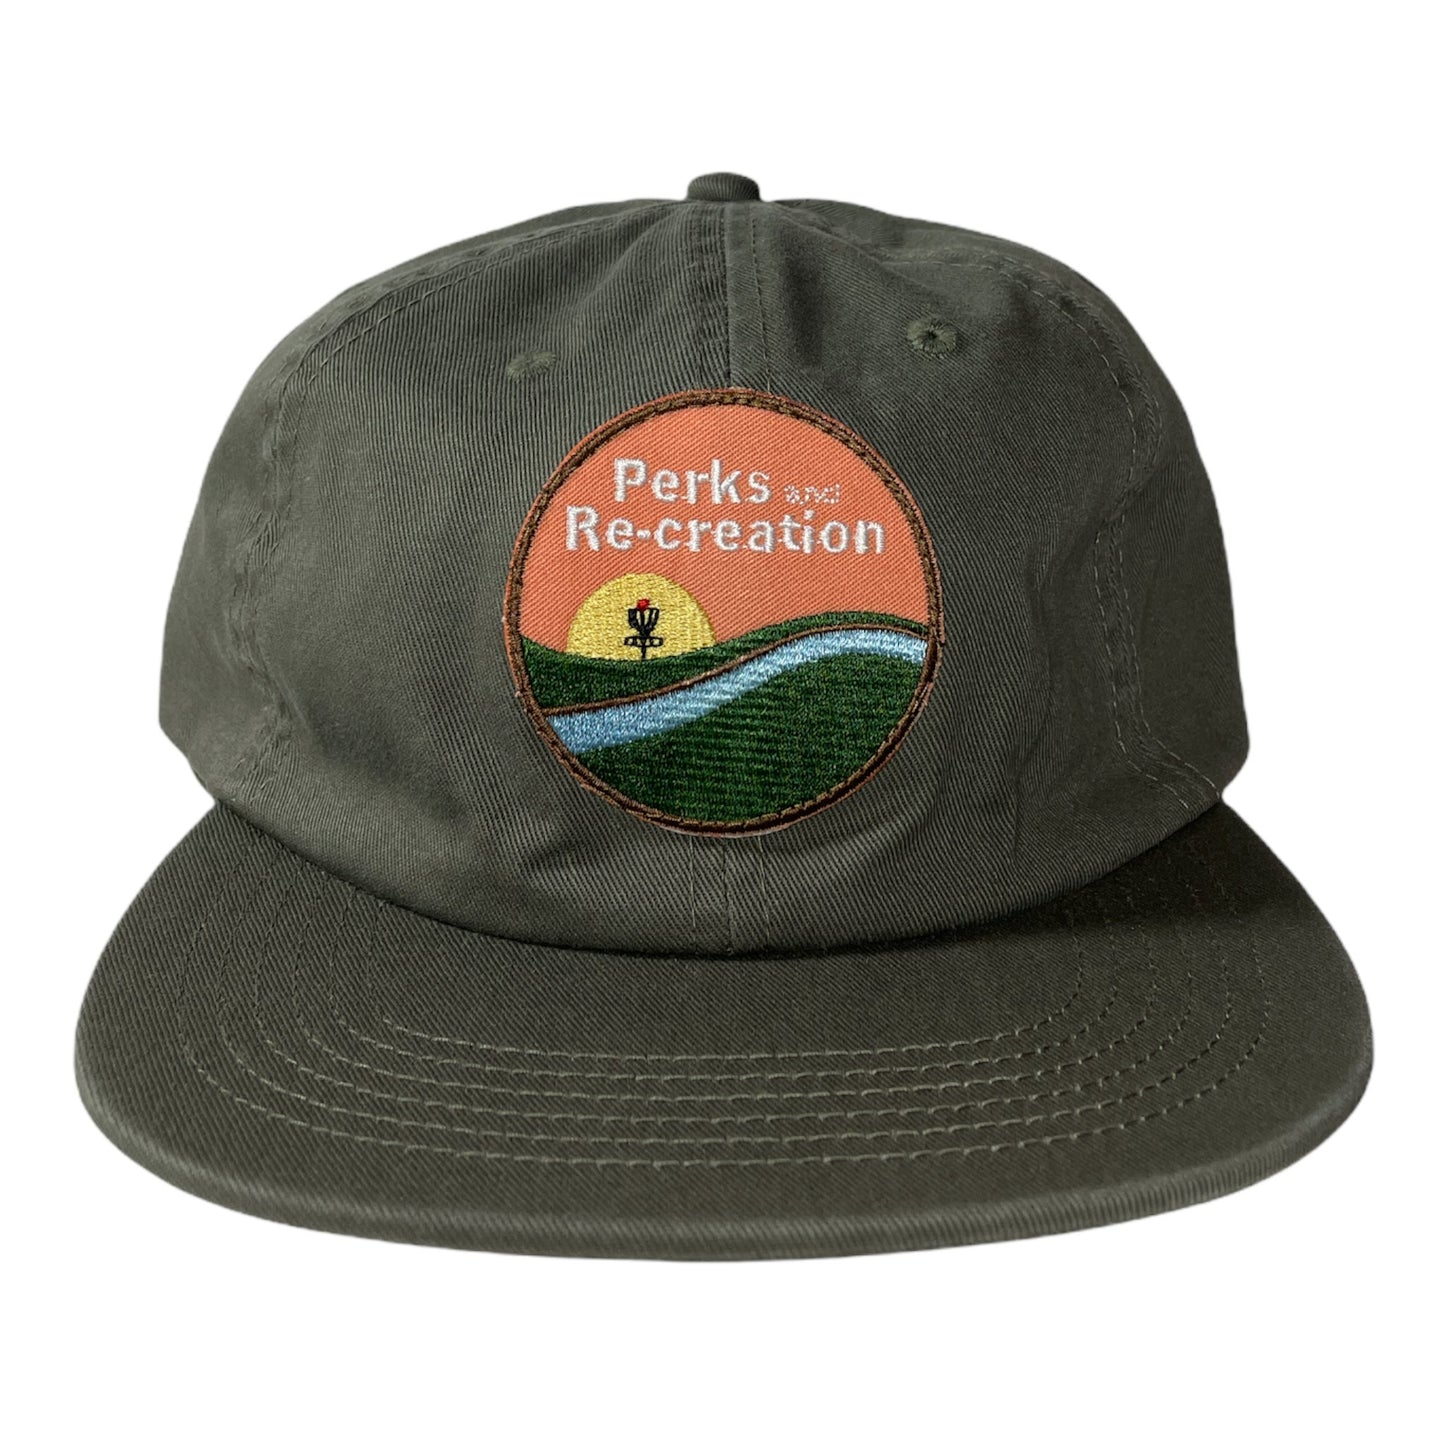 Perks and Re-creation Day Perk Ranger Hat Disc Golf